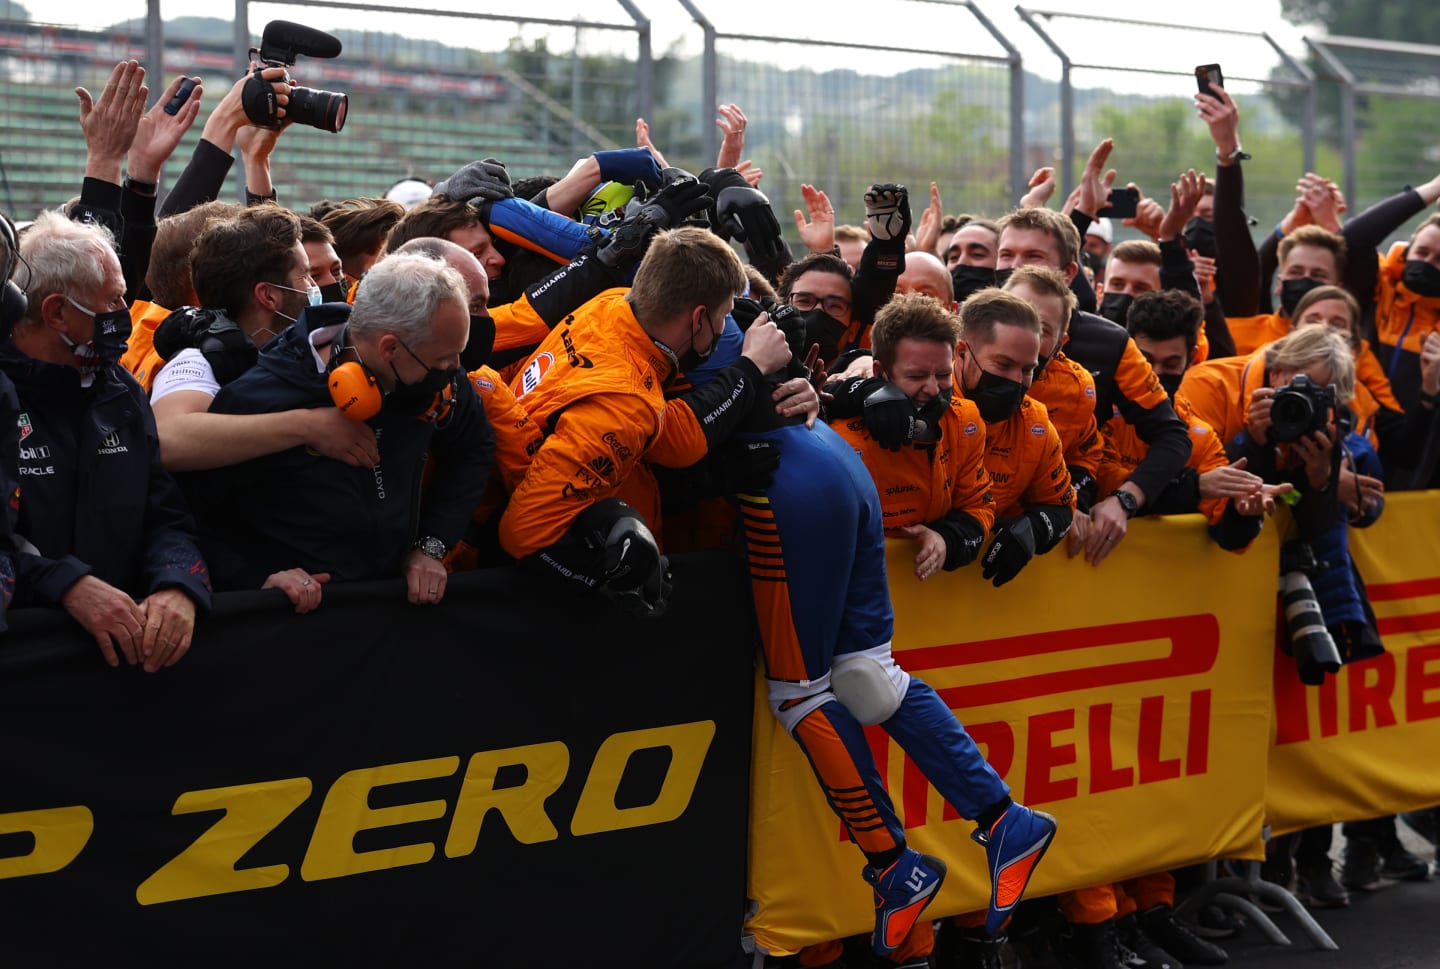 IMOLA, ITALY - APRIL 18: Third placed Lando Norris of Great Britain and McLaren F1 celebrates in parc ferme with his team during the F1 Grand Prix of Emilia Romagna at Autodromo Enzo e Dino Ferrari on April 18, 2021 in Imola, Italy. (Photo by Bryn Lennon/Getty Images)